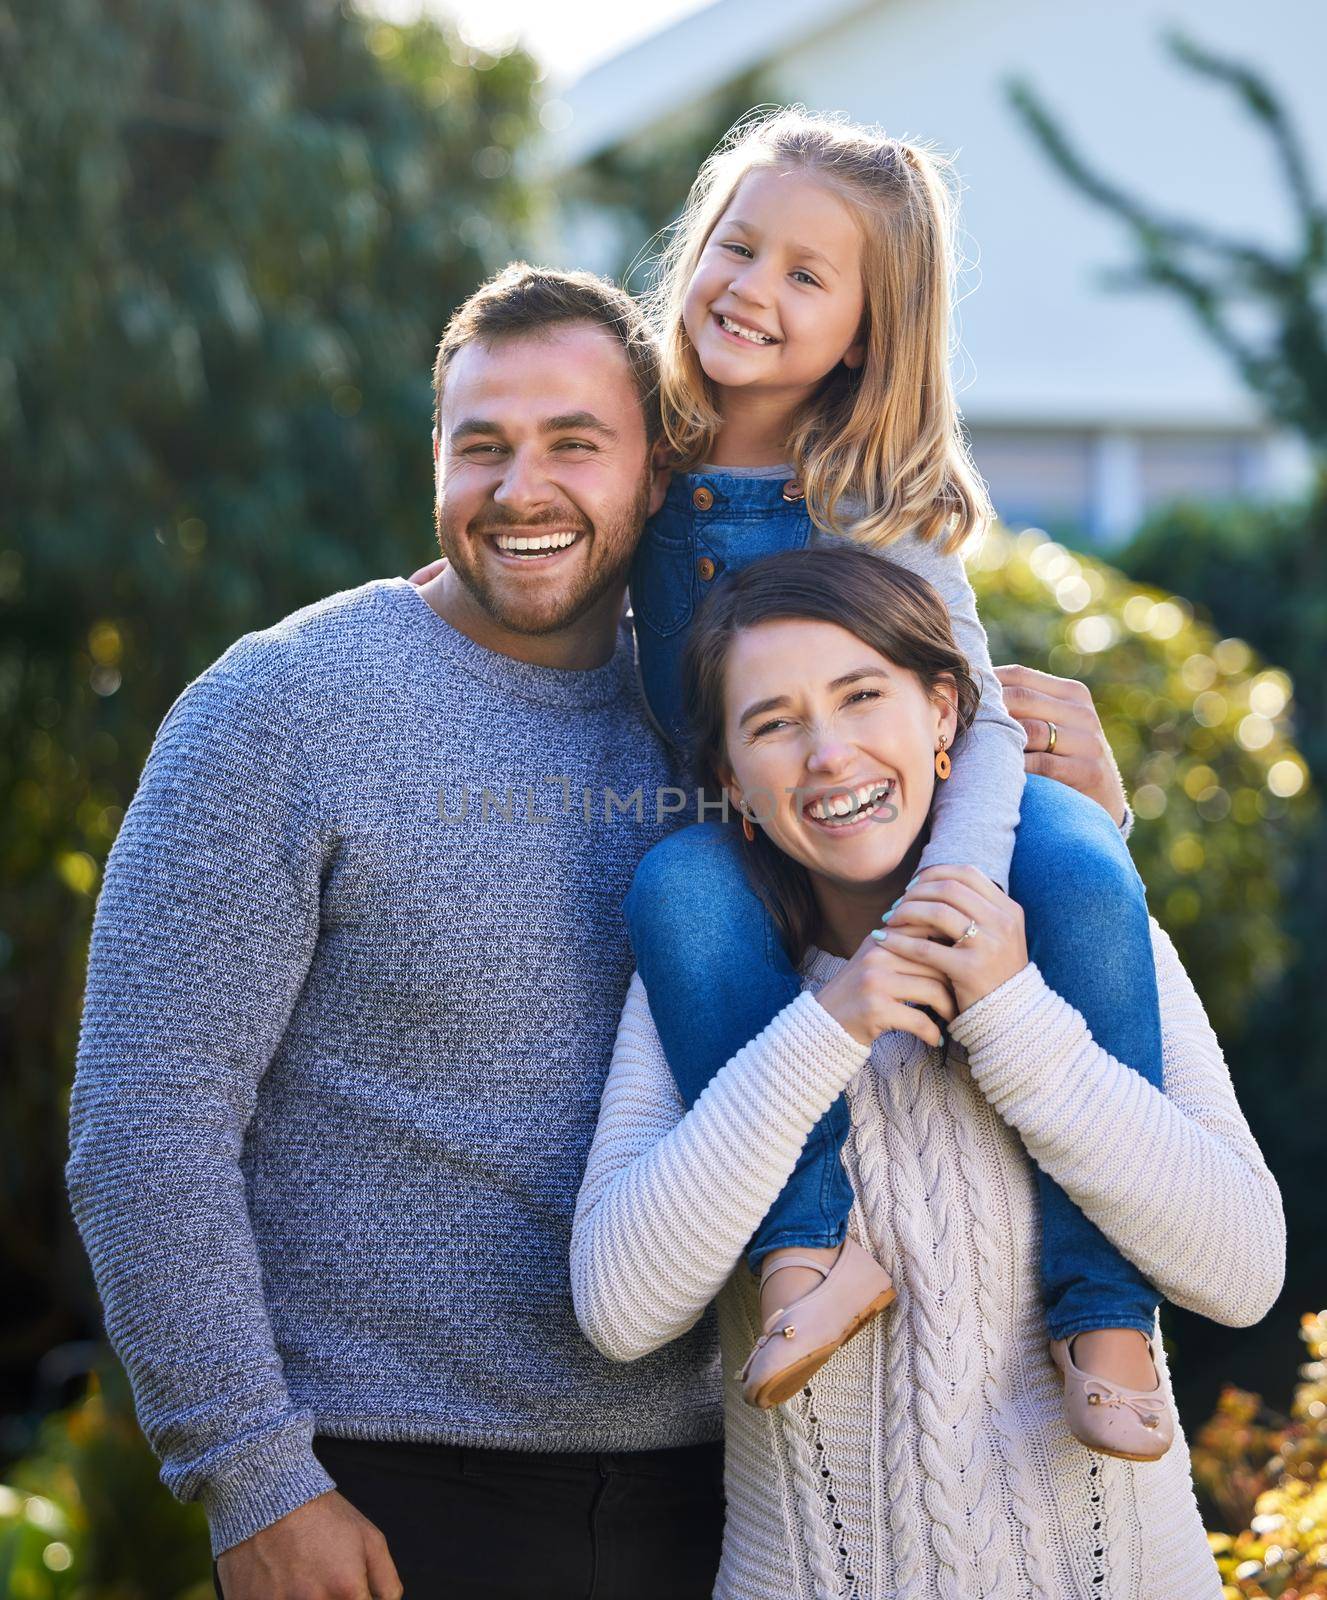 Strong family bonds are essential for a childs development. Portrait of a happy family bonding together outdoors